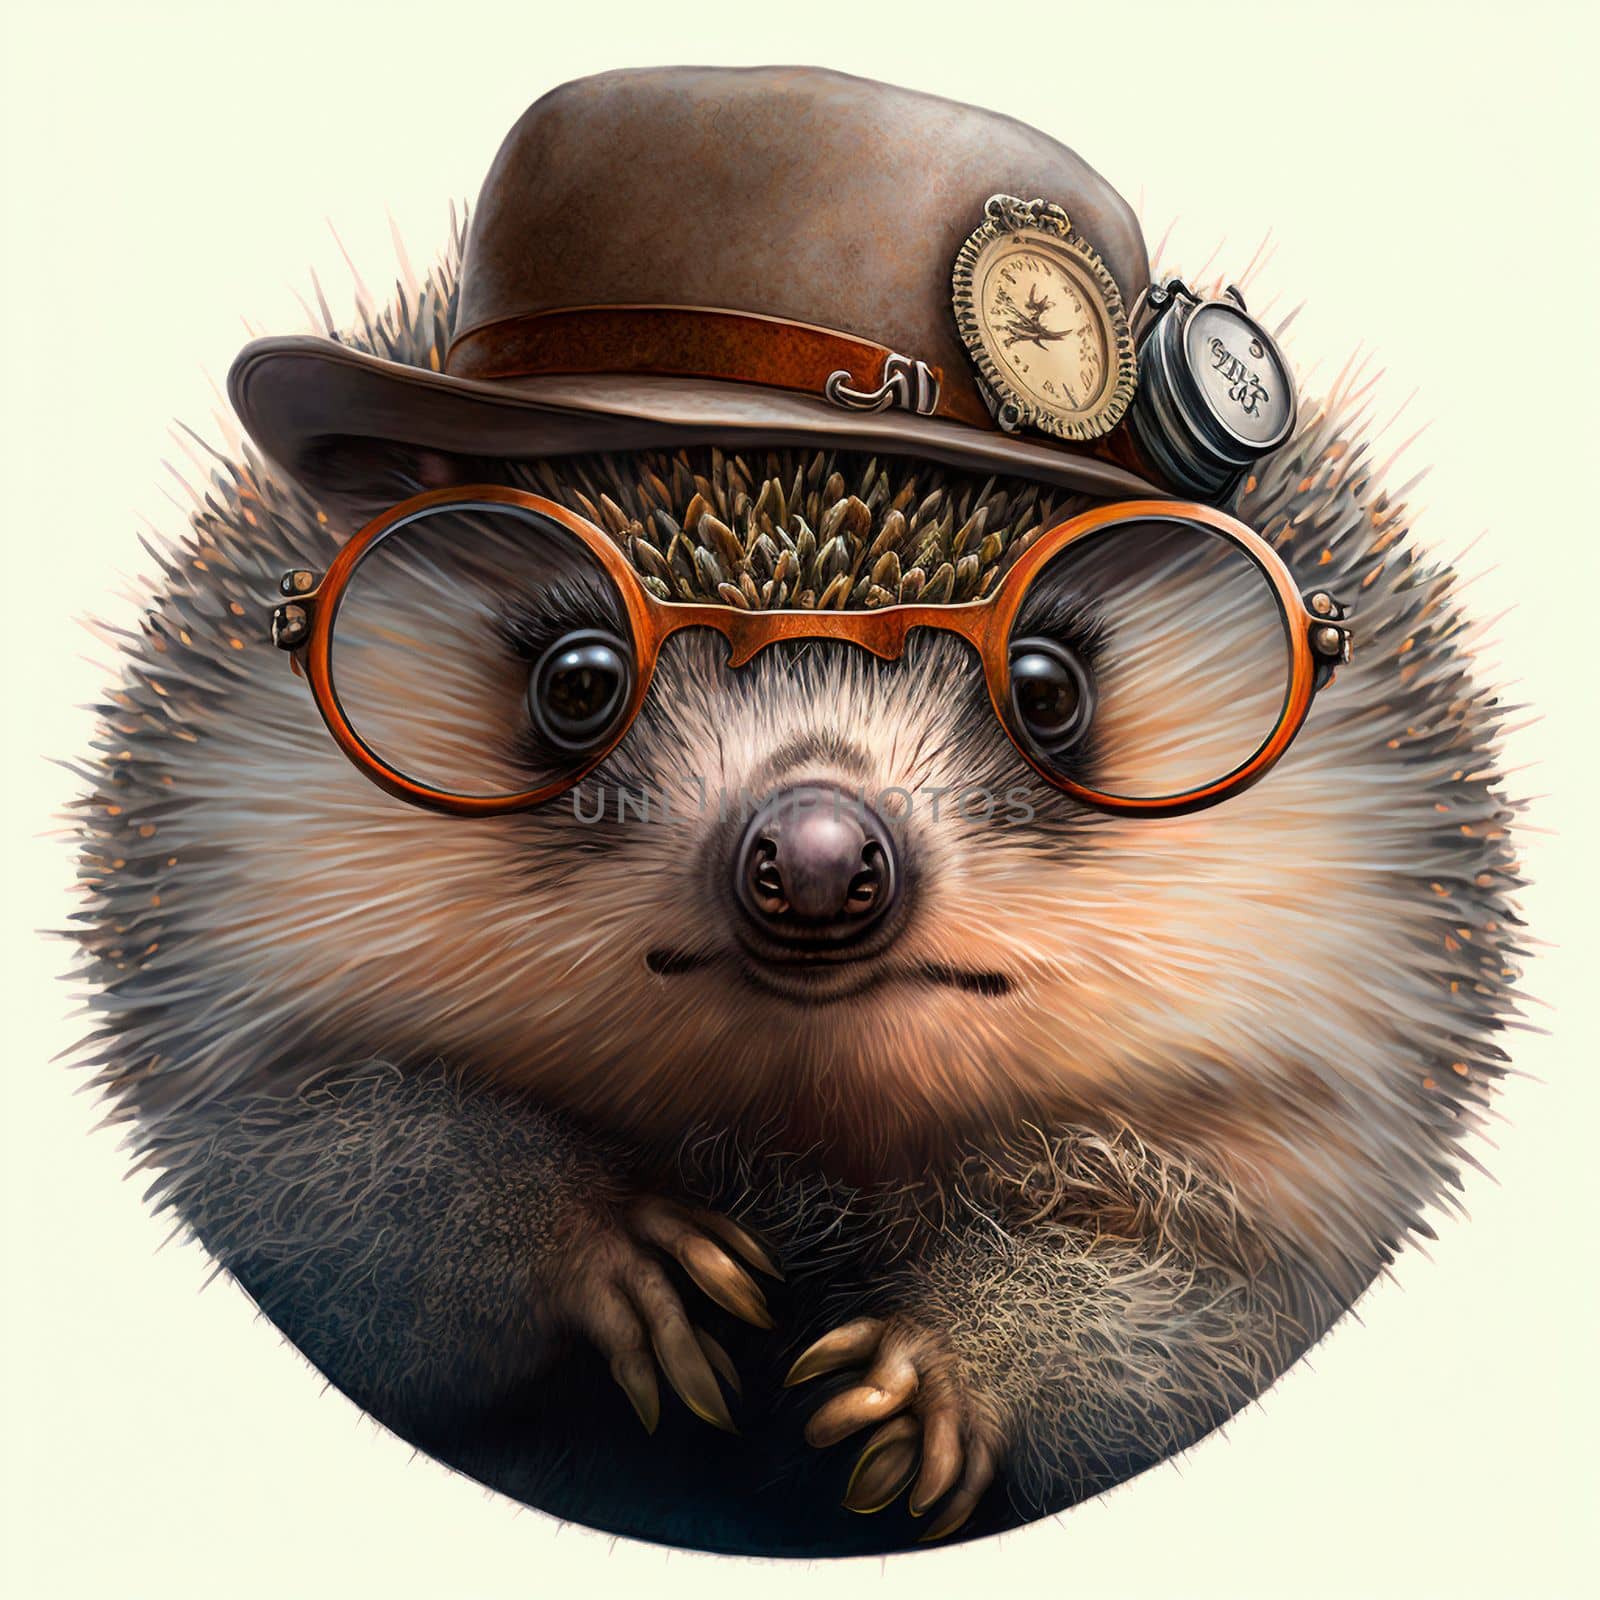 Hedgehog with glasses and a steampunk hat by NeuroSky